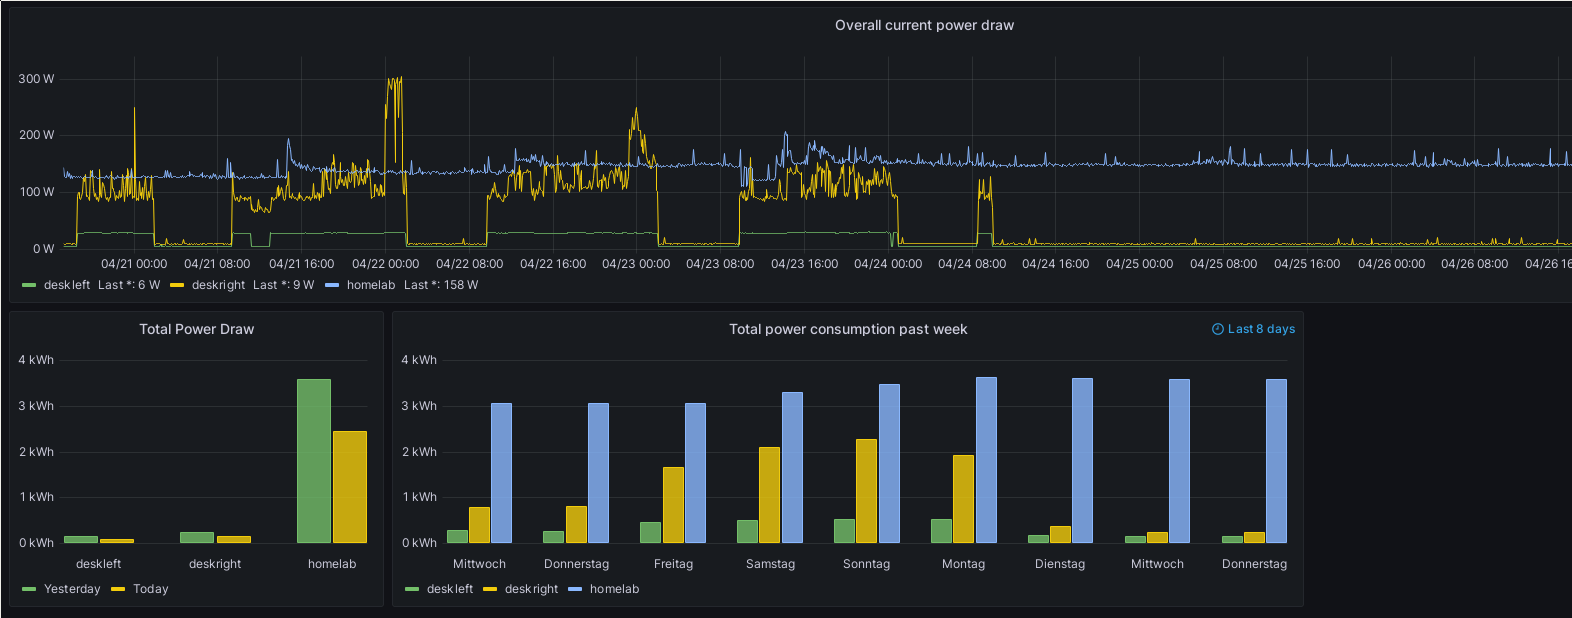 A screenshot of three Grafana visualizations on a dashboard. The top one is headed 'Overall current power draw'. The X axis has time on it, from 17:30h on 2023-04-20 to 17:00h 2023-04-27. The Y axis contains Watt numbers, from 0W to 300W. It contains three lines, labeled 'deskleft', 'deskright' and 'homelab'. The deskright line goes down to 10W regularly during nighttime, while showing peaks to 300W with an average of 100W. The 'deskleft' line switches between 30W and 6W, following the same pattern of low load during nighttime and high load during daytime. Both the deskleft and deskright lines fall off completely 6W and 10W after 2023.04.24. The 'homelab' line starts out oscillating around 125W, but starts oscillating around 150W after 2023-04-23. It remains at that level even after deskright and deskleft go flat. The second graph is headed 'Total Power Draw. It#s a bar chart, with 'deskleft', 'deskright' and 'homelab' on the X axis and kWh going from 0 to 4 on the Y axis. It shows very short bars for deskleft and deskright below 1kWh, while the homelab bars are up to 3.5kWh. The last chart is headed 'Total power consumption last week'. It has the weekdays on the X axis, going from Wednesday to Thursday. On the Y axis is power consumption in kWh again, going from 0 to 4. For the first Wednesday and Thursday, the consumption for the homelab is still around 3.05 kWh, but it increases 3.62 by Monday.